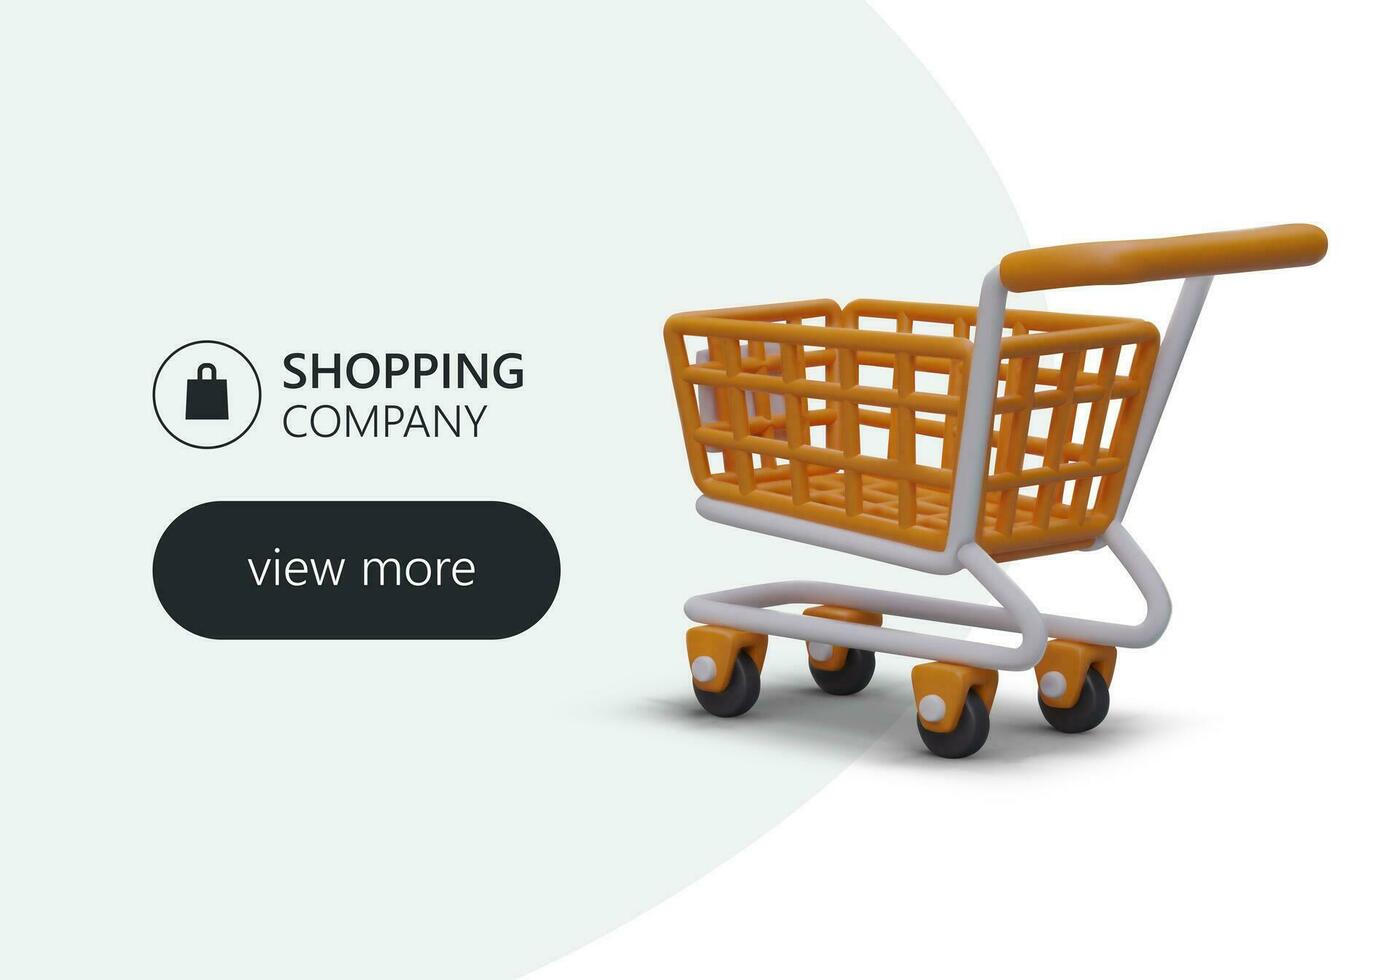 Time to shop. Online store advertising banner. Template with text and button vector